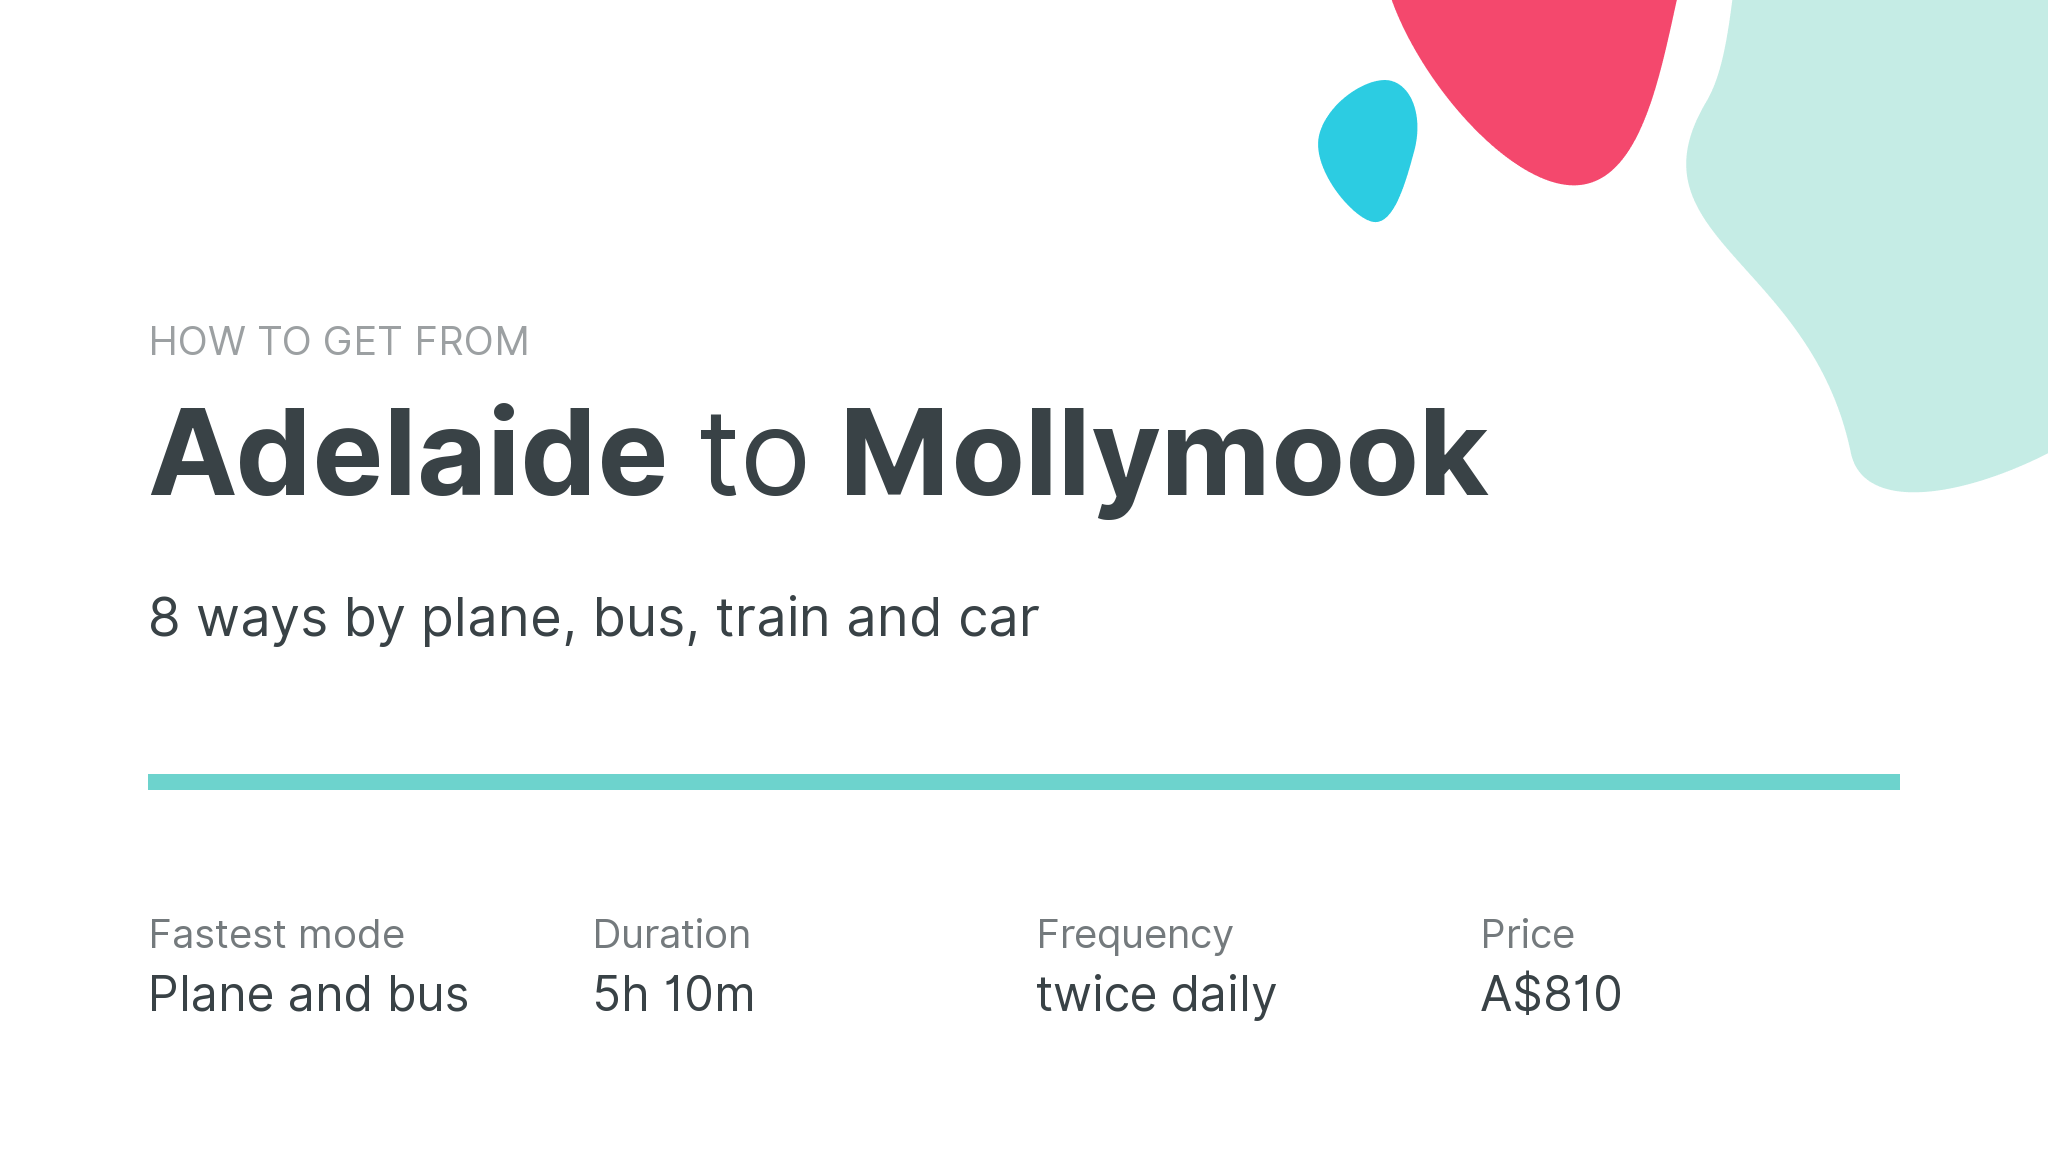 How do I get from Adelaide to Mollymook